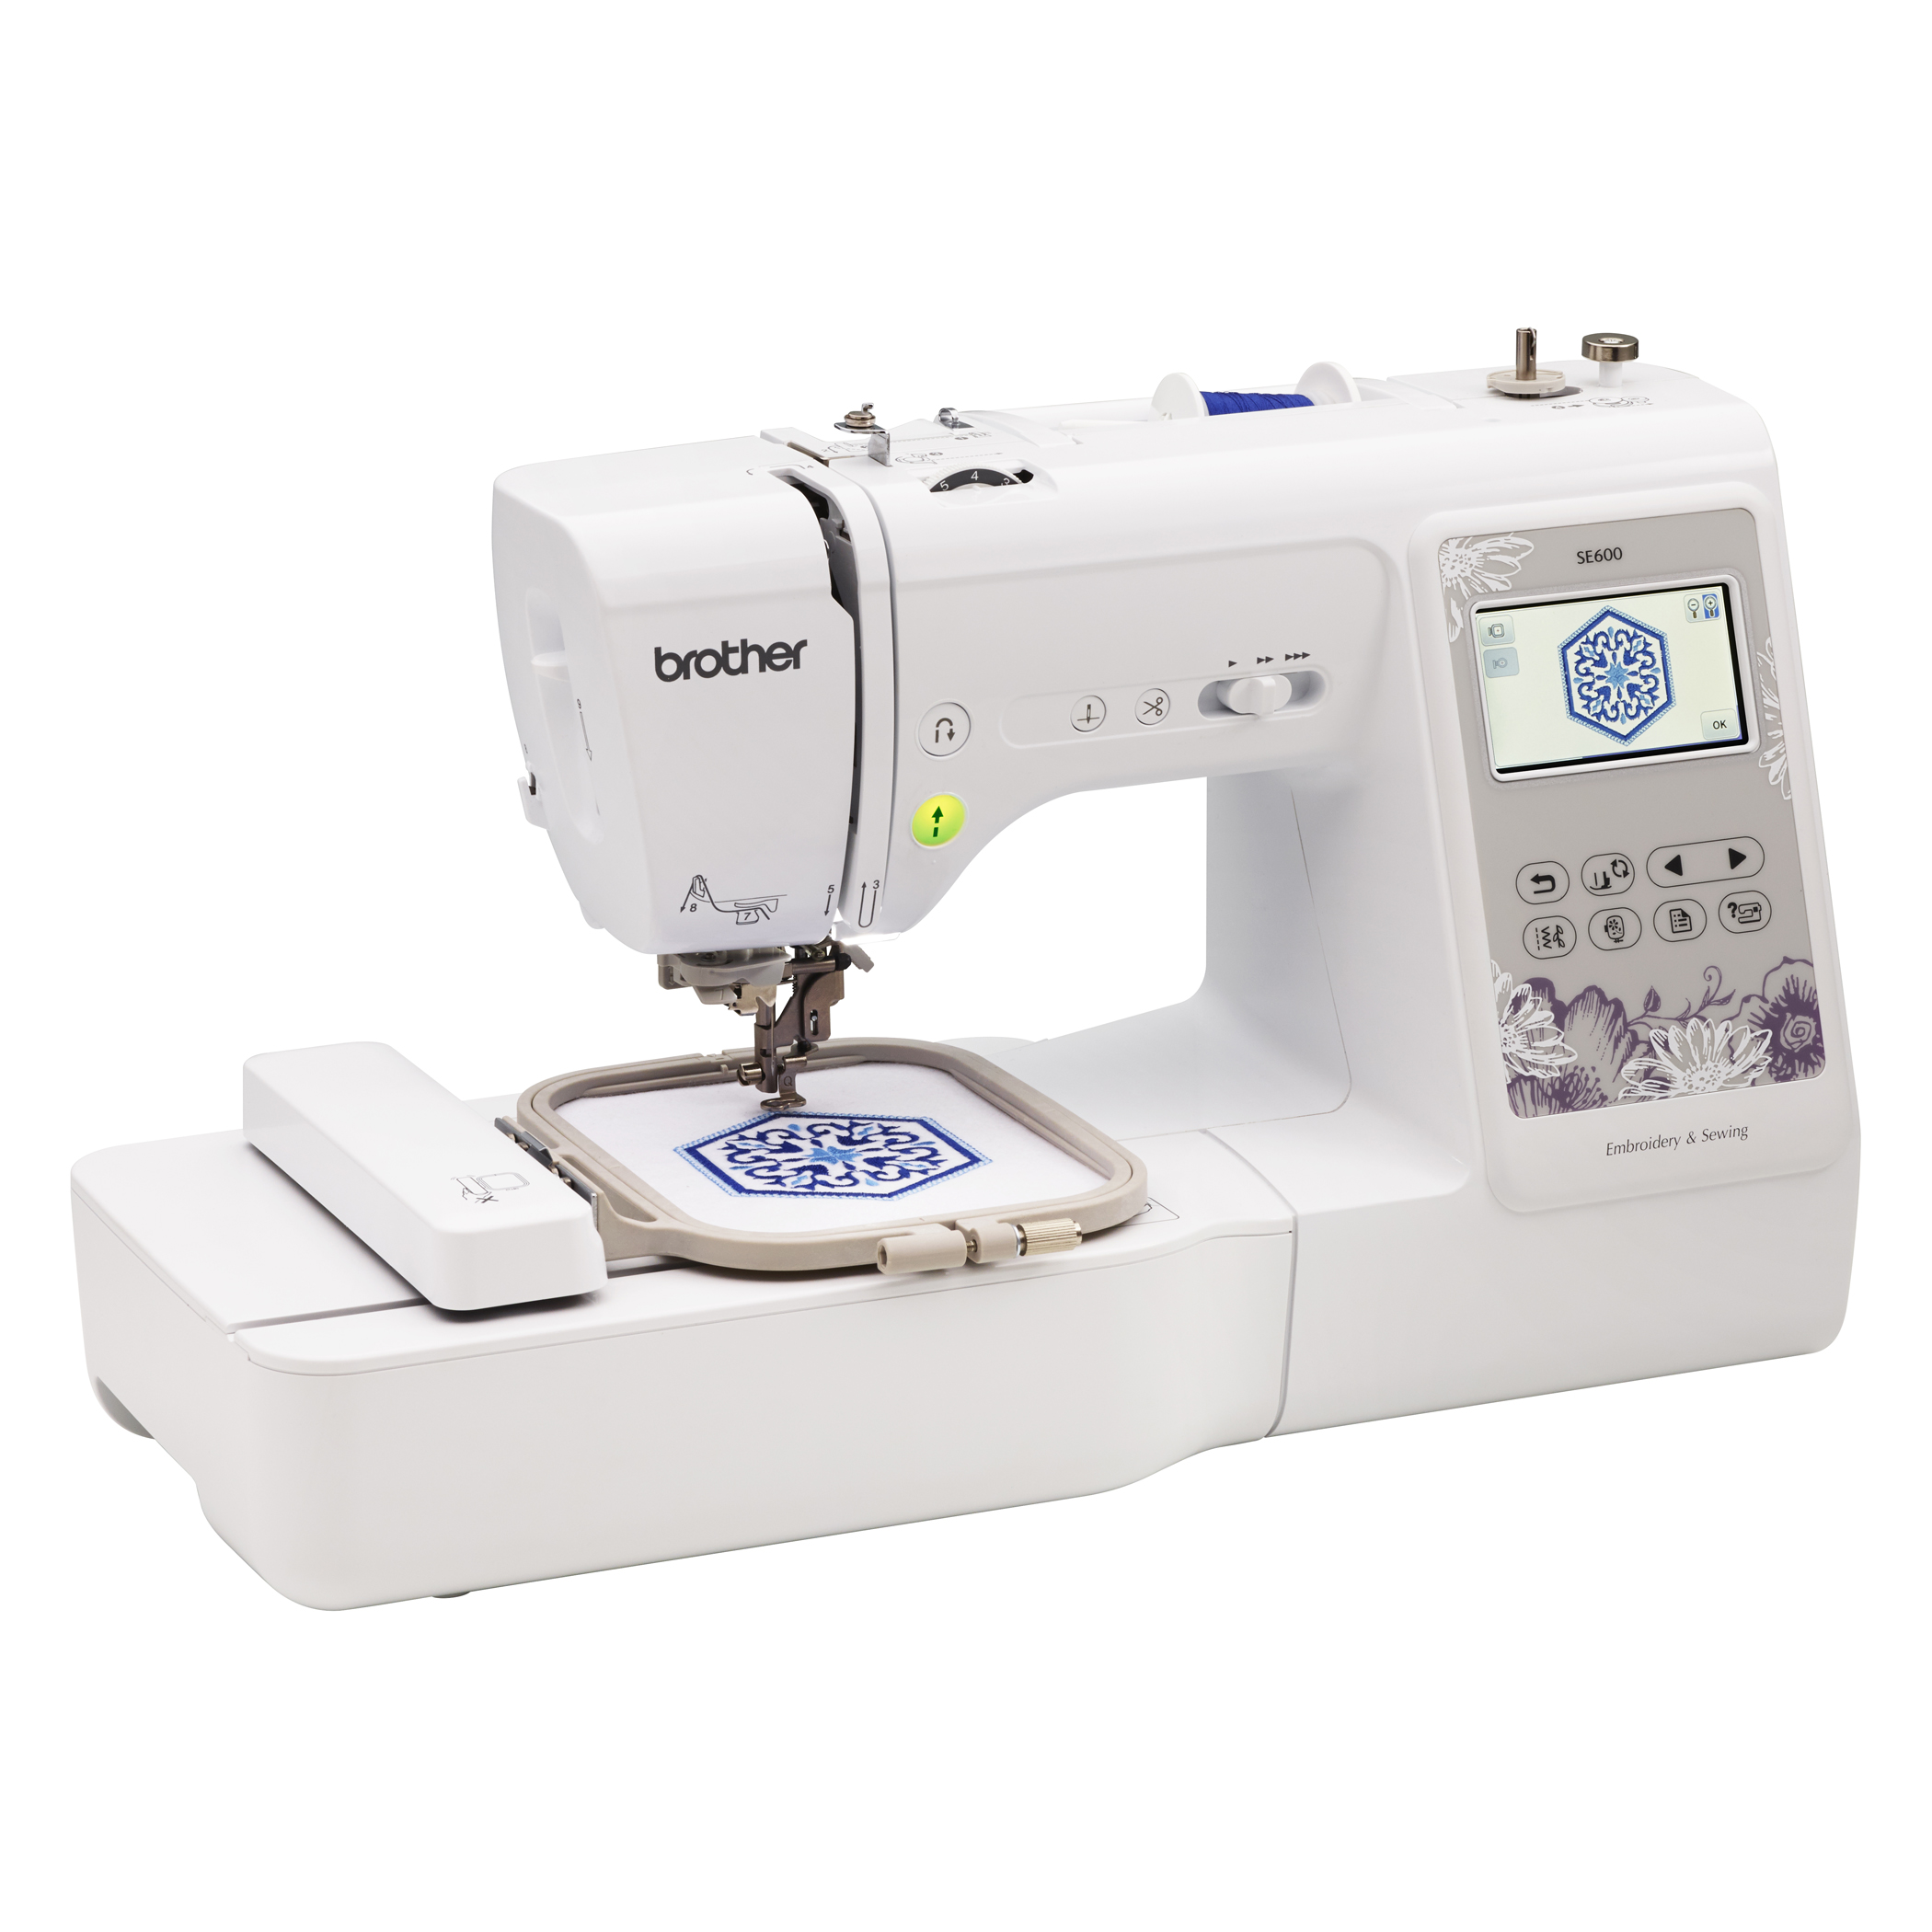 Sewing Machine For Beginners Review Online